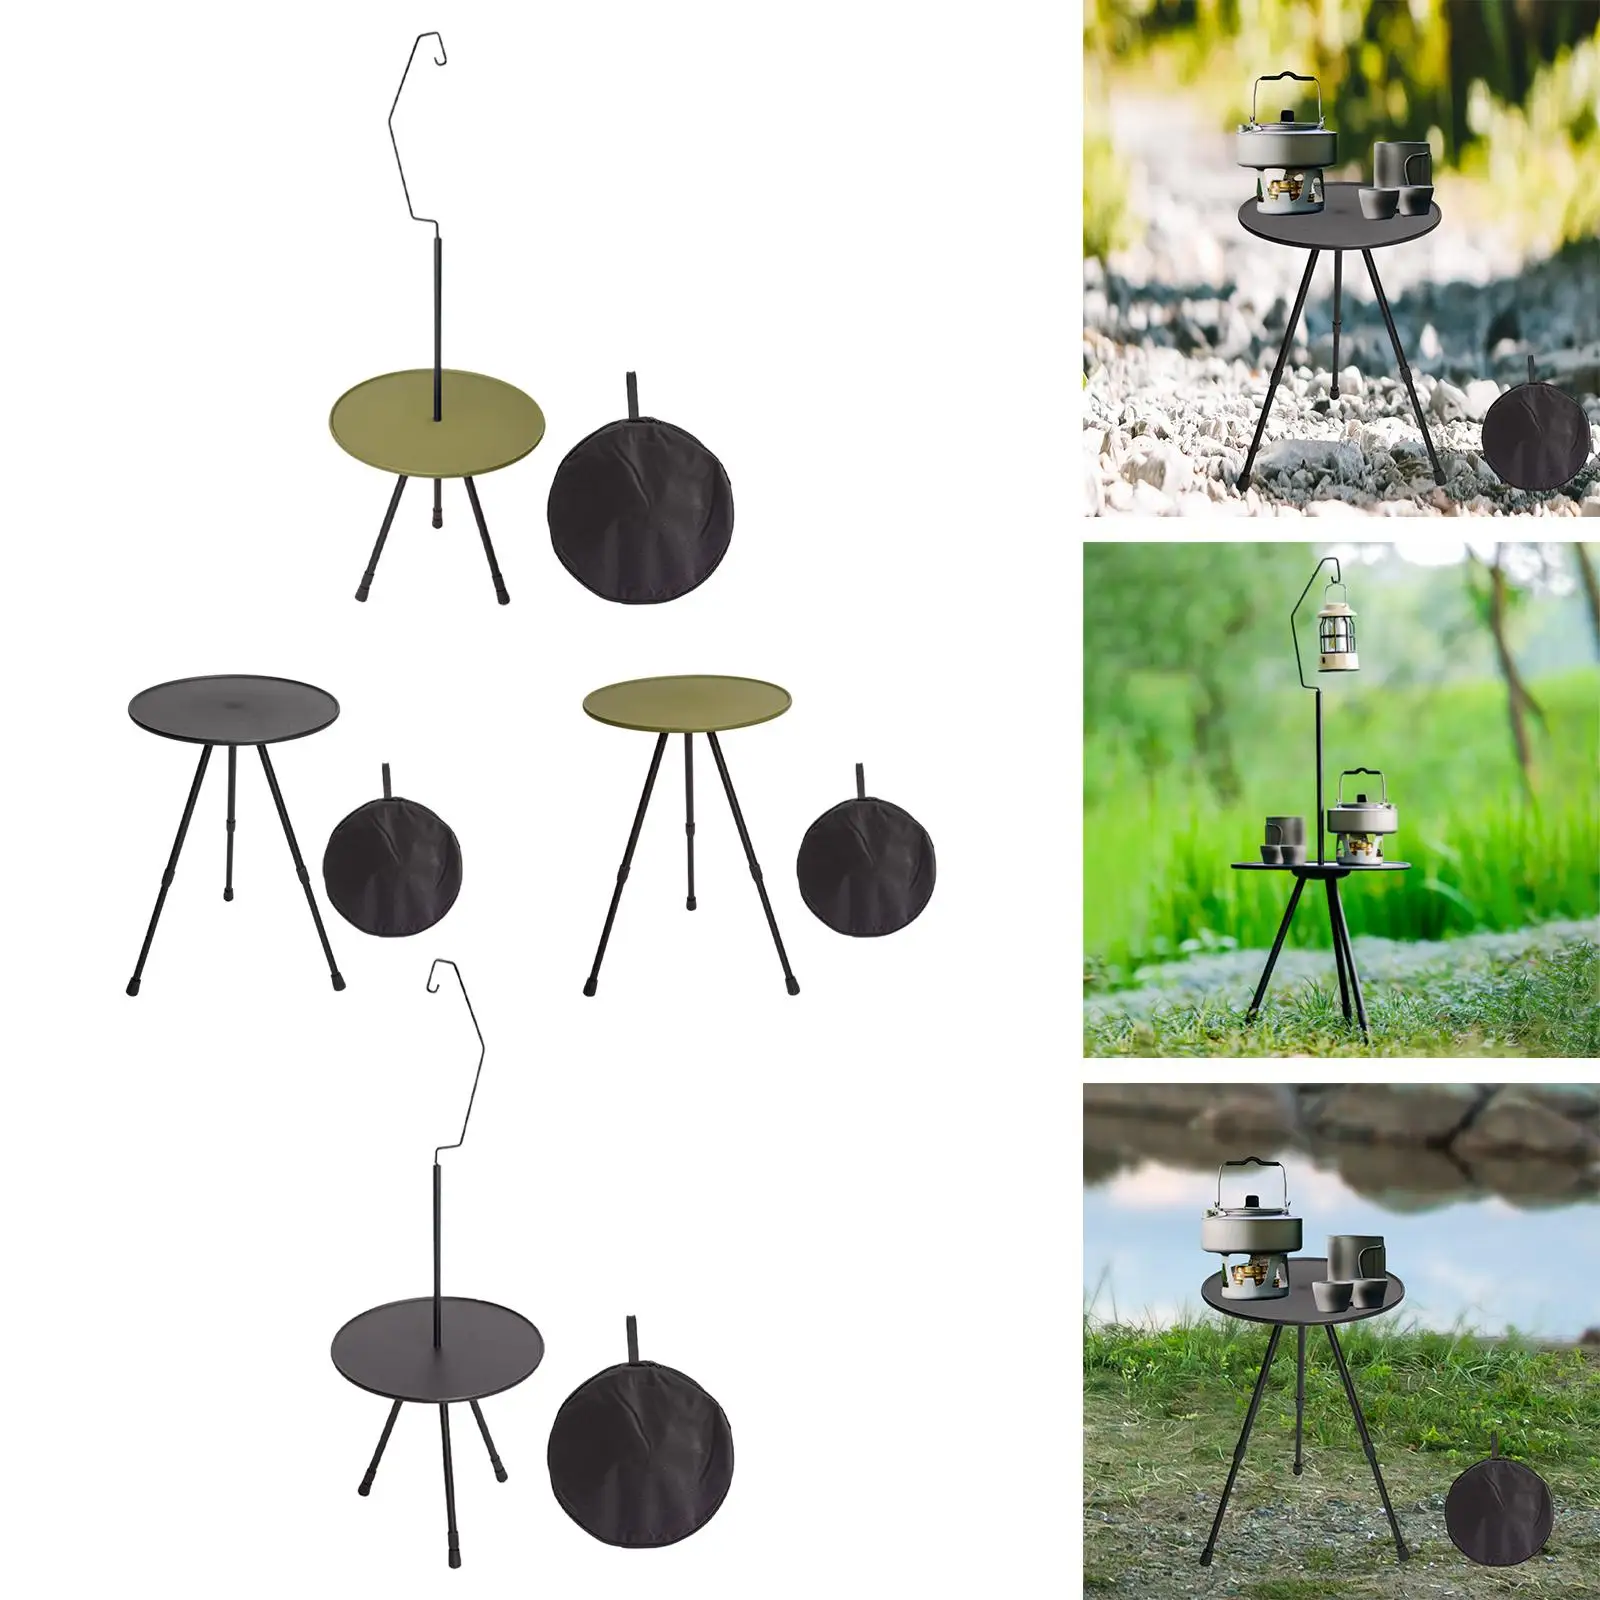 Portable Camping Table Outdoor Furniture Telescopic Portable Outdoor Side Table for Picnic Barbecue Backpacking Fishing Kitchen